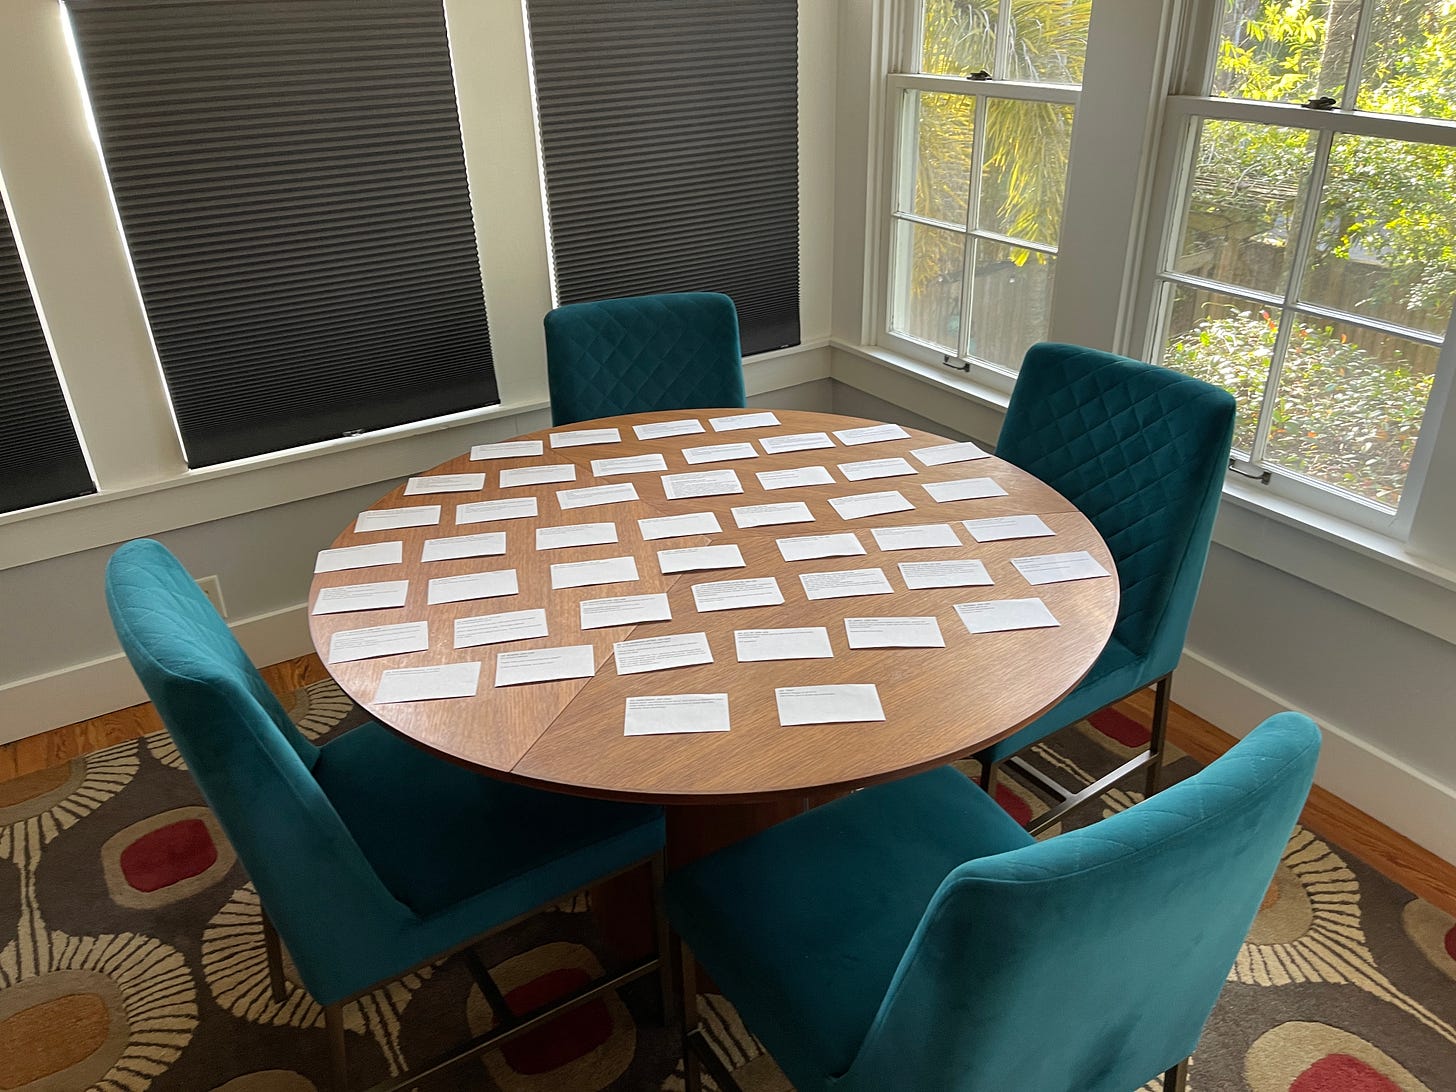 A table set neatly with typewritten notecards.